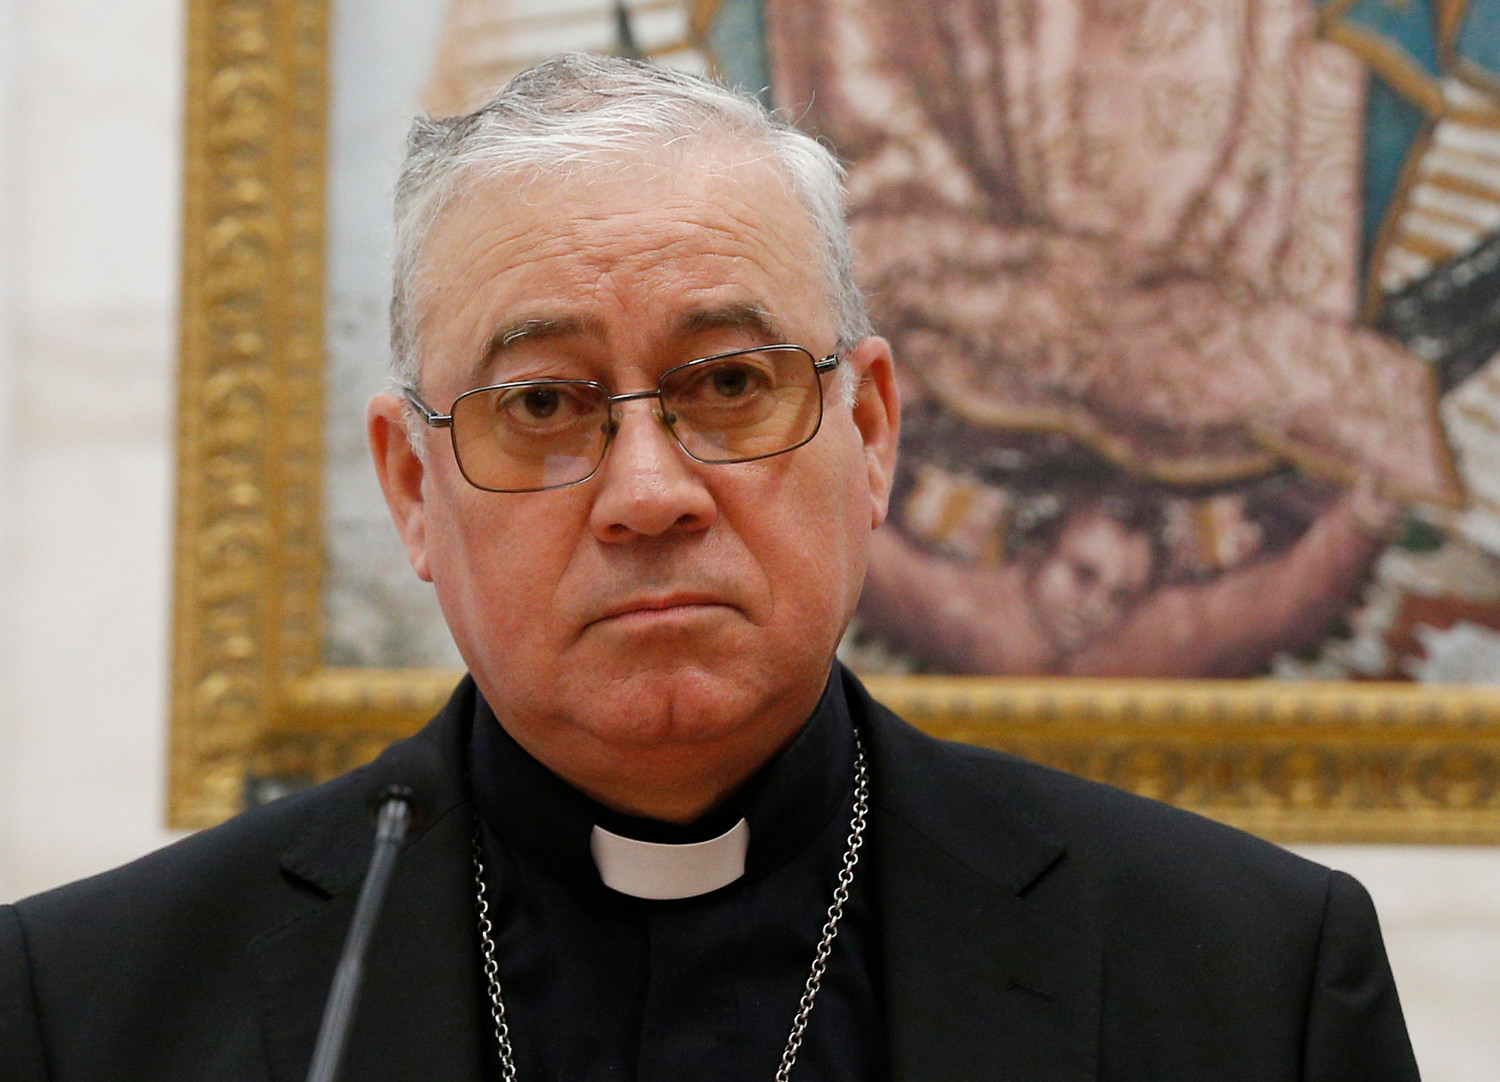 Bishop Juan Ignacio Gonzalez Errazuriz of San Bernardo, Chile, attends a press conference in Rome May 18. Bishop Gonzalez said every bishop in Chile offered his resignation to Pope Francis after a three-day meeting with him at the Vatican.